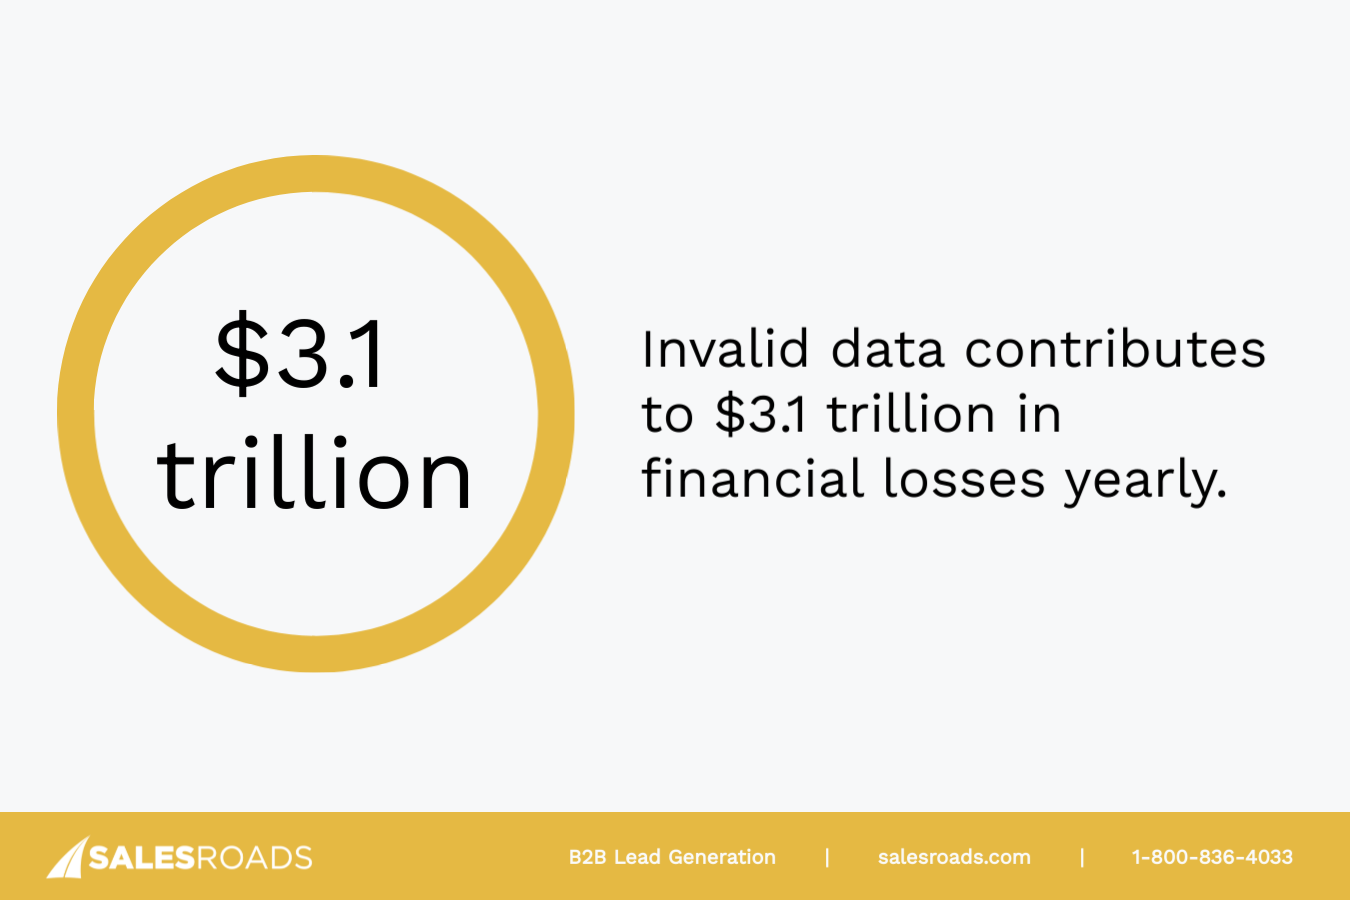 Blog Image: Businesses grapple with significant financial losses due to invalid data, amounting to a staggering $3.1 trillion annually in the B2B sector. 